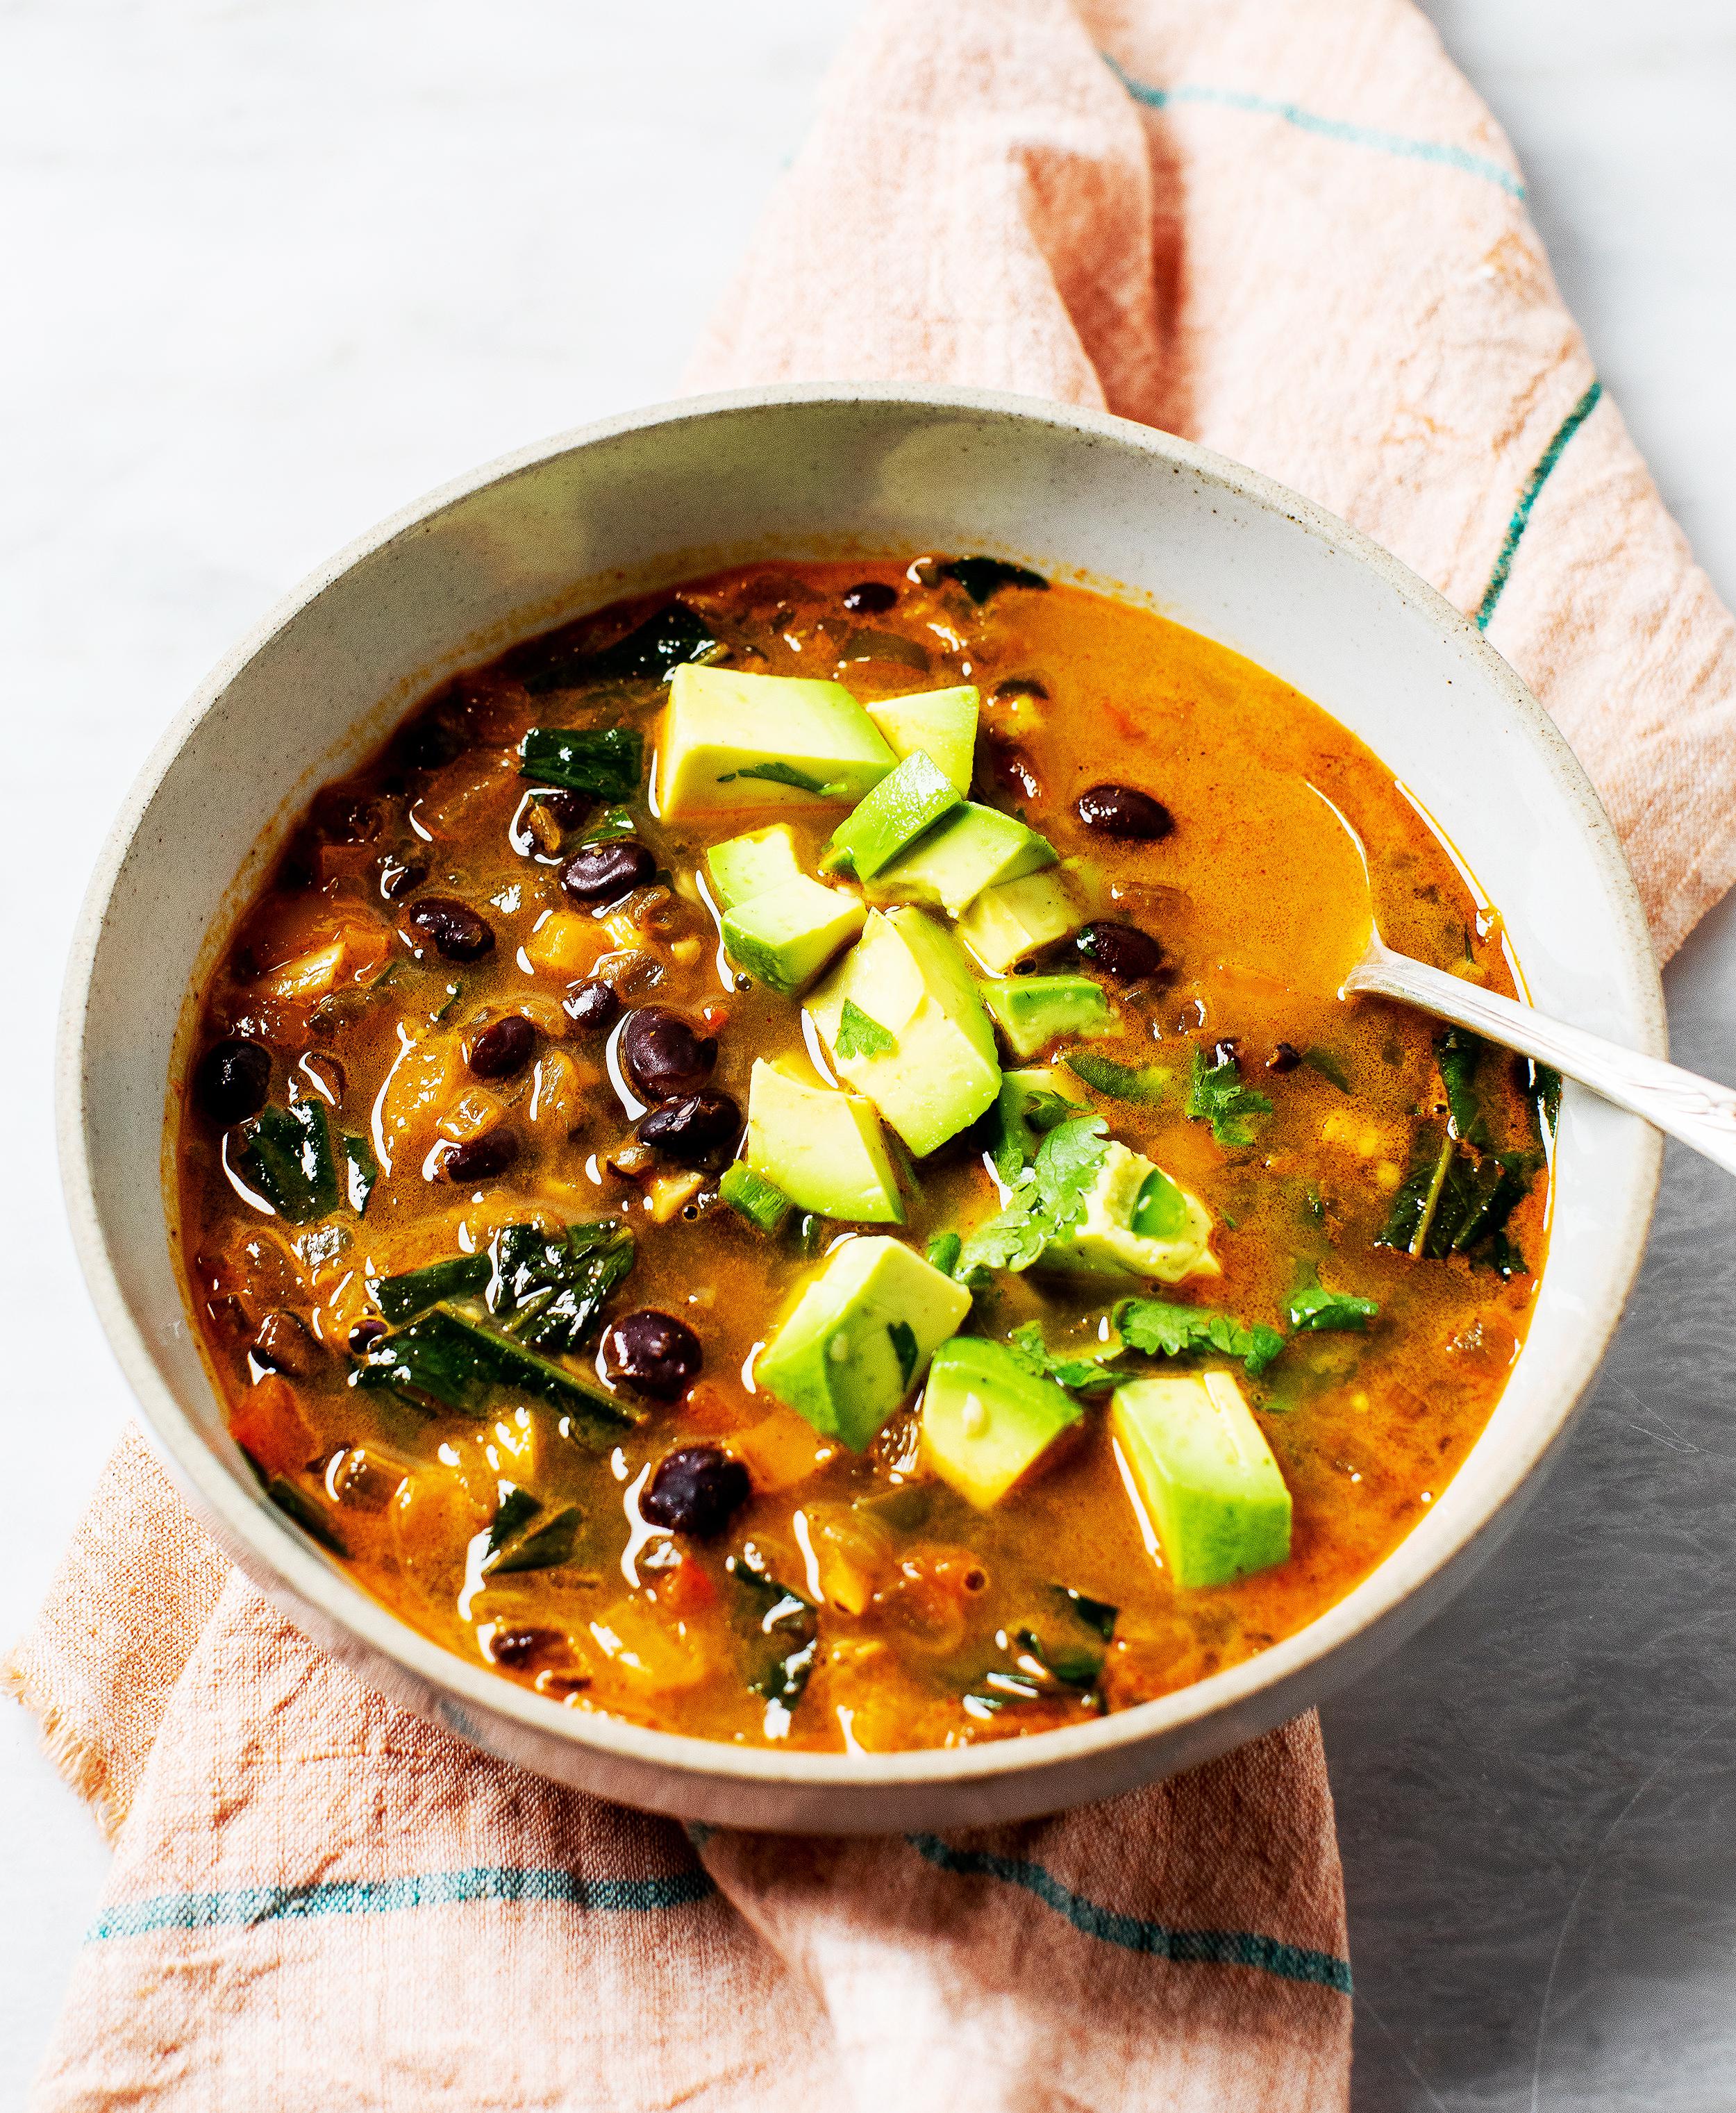 More Beans! Spicy Black Bean Soup with Avocado. No blender required ...